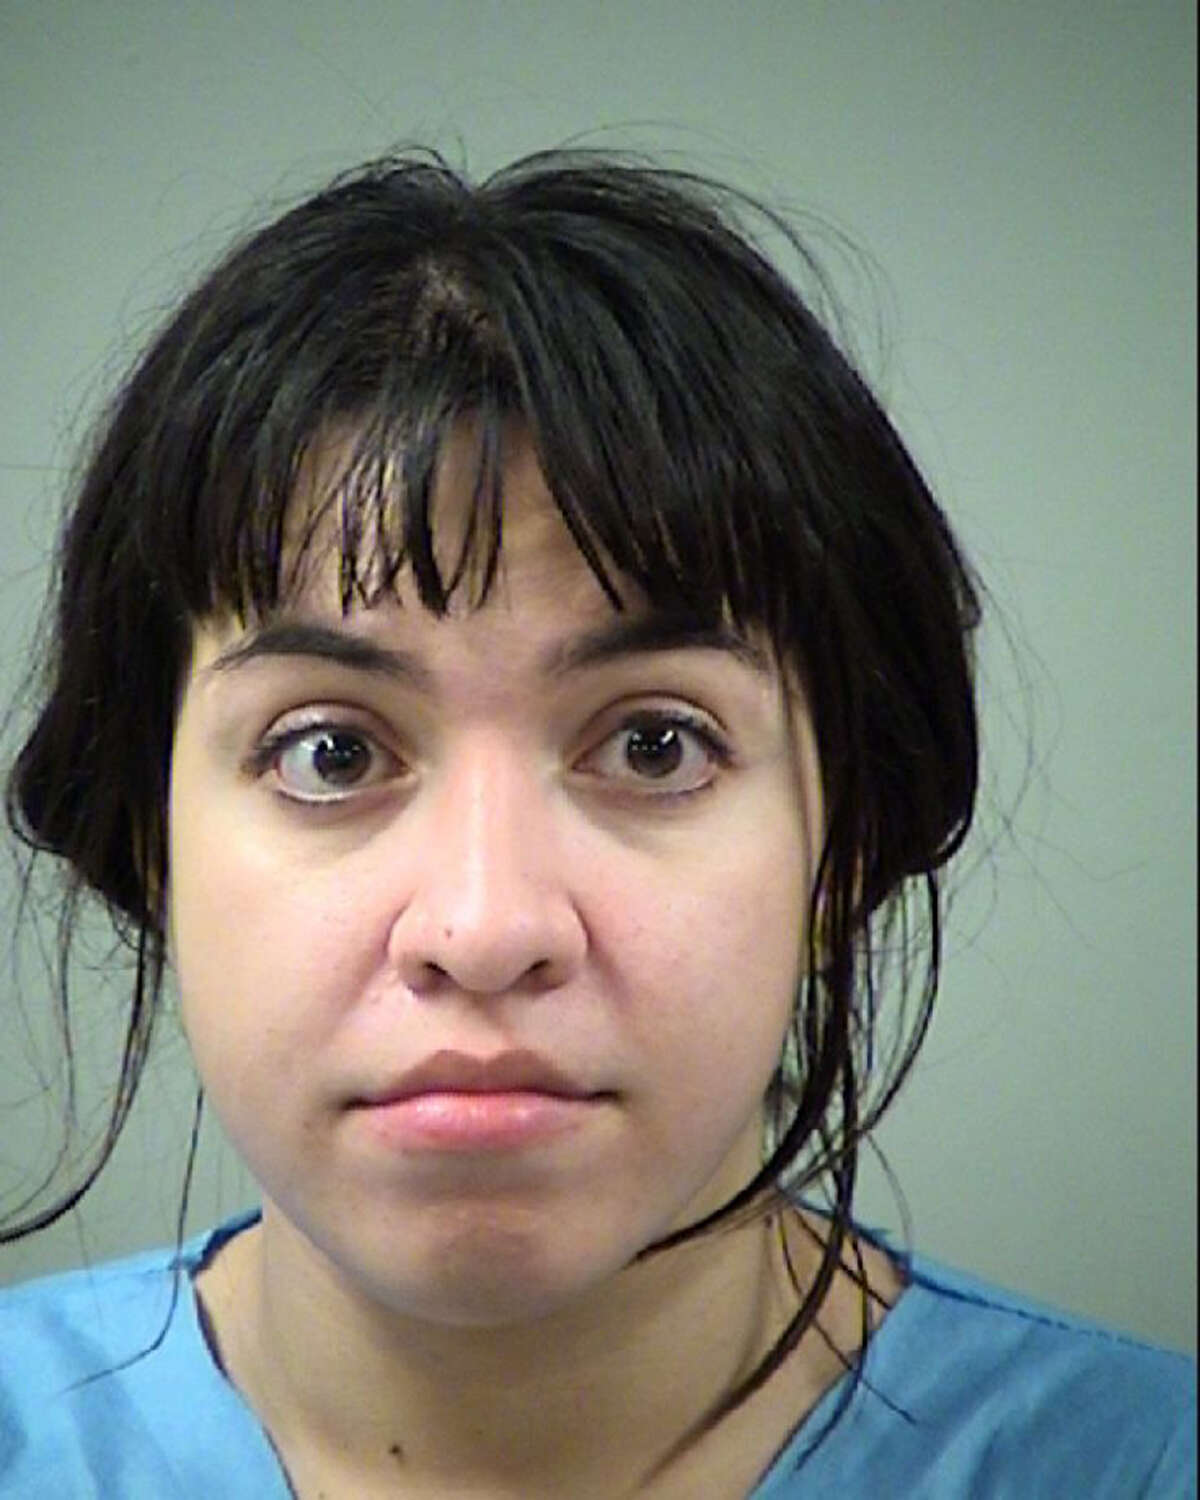 Police said Maris Gonzalez was caught straddling a 15-year-old former student in a car.